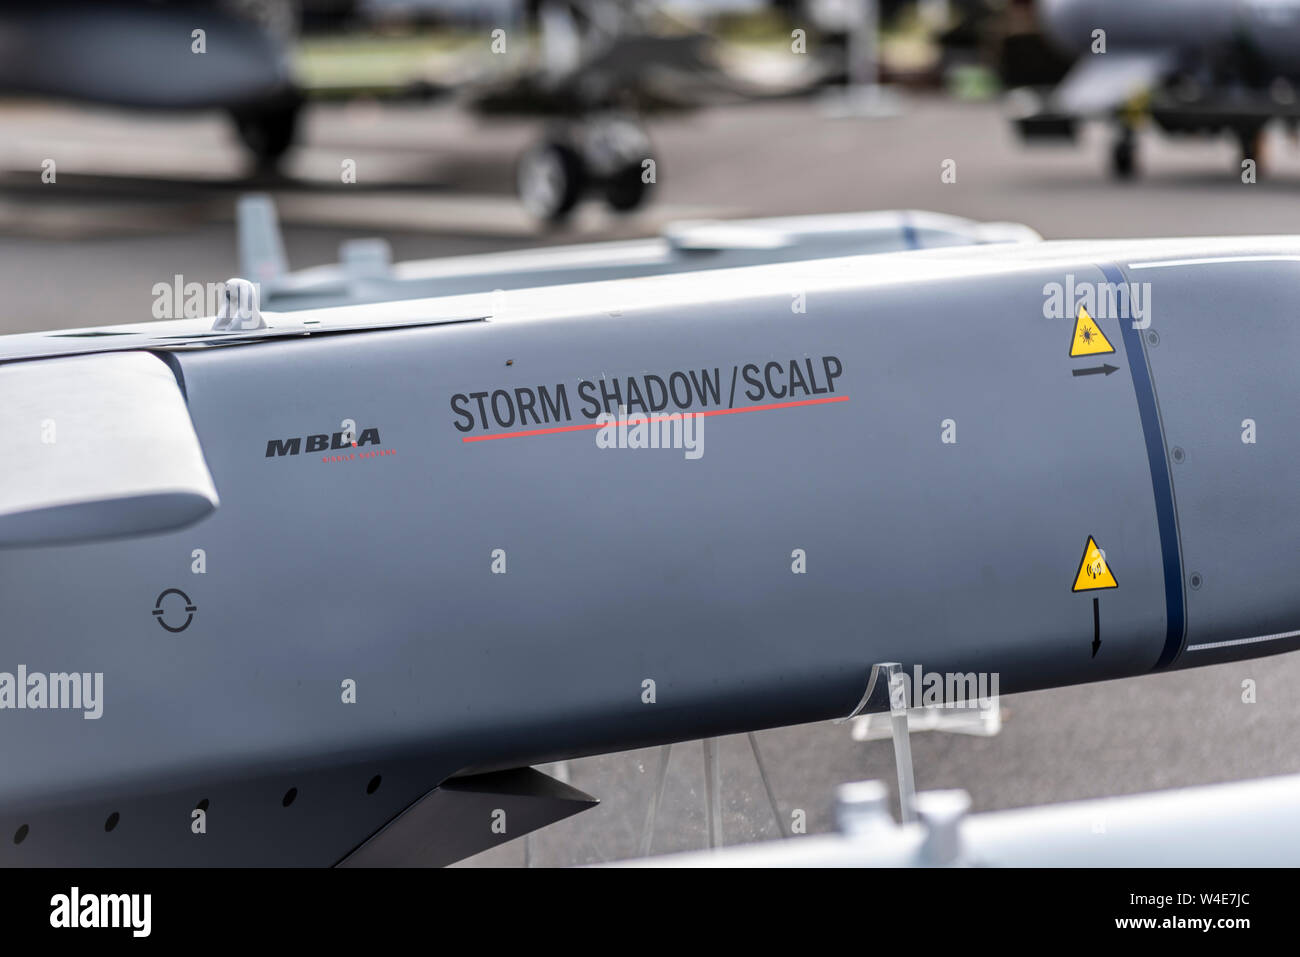 MBDA Storm Shadow, Scalp. Weapons from RAF Typhoon jet fighter on display at Royal International Air Tattoo airshow, RAF Fairford, UK Stock Photo